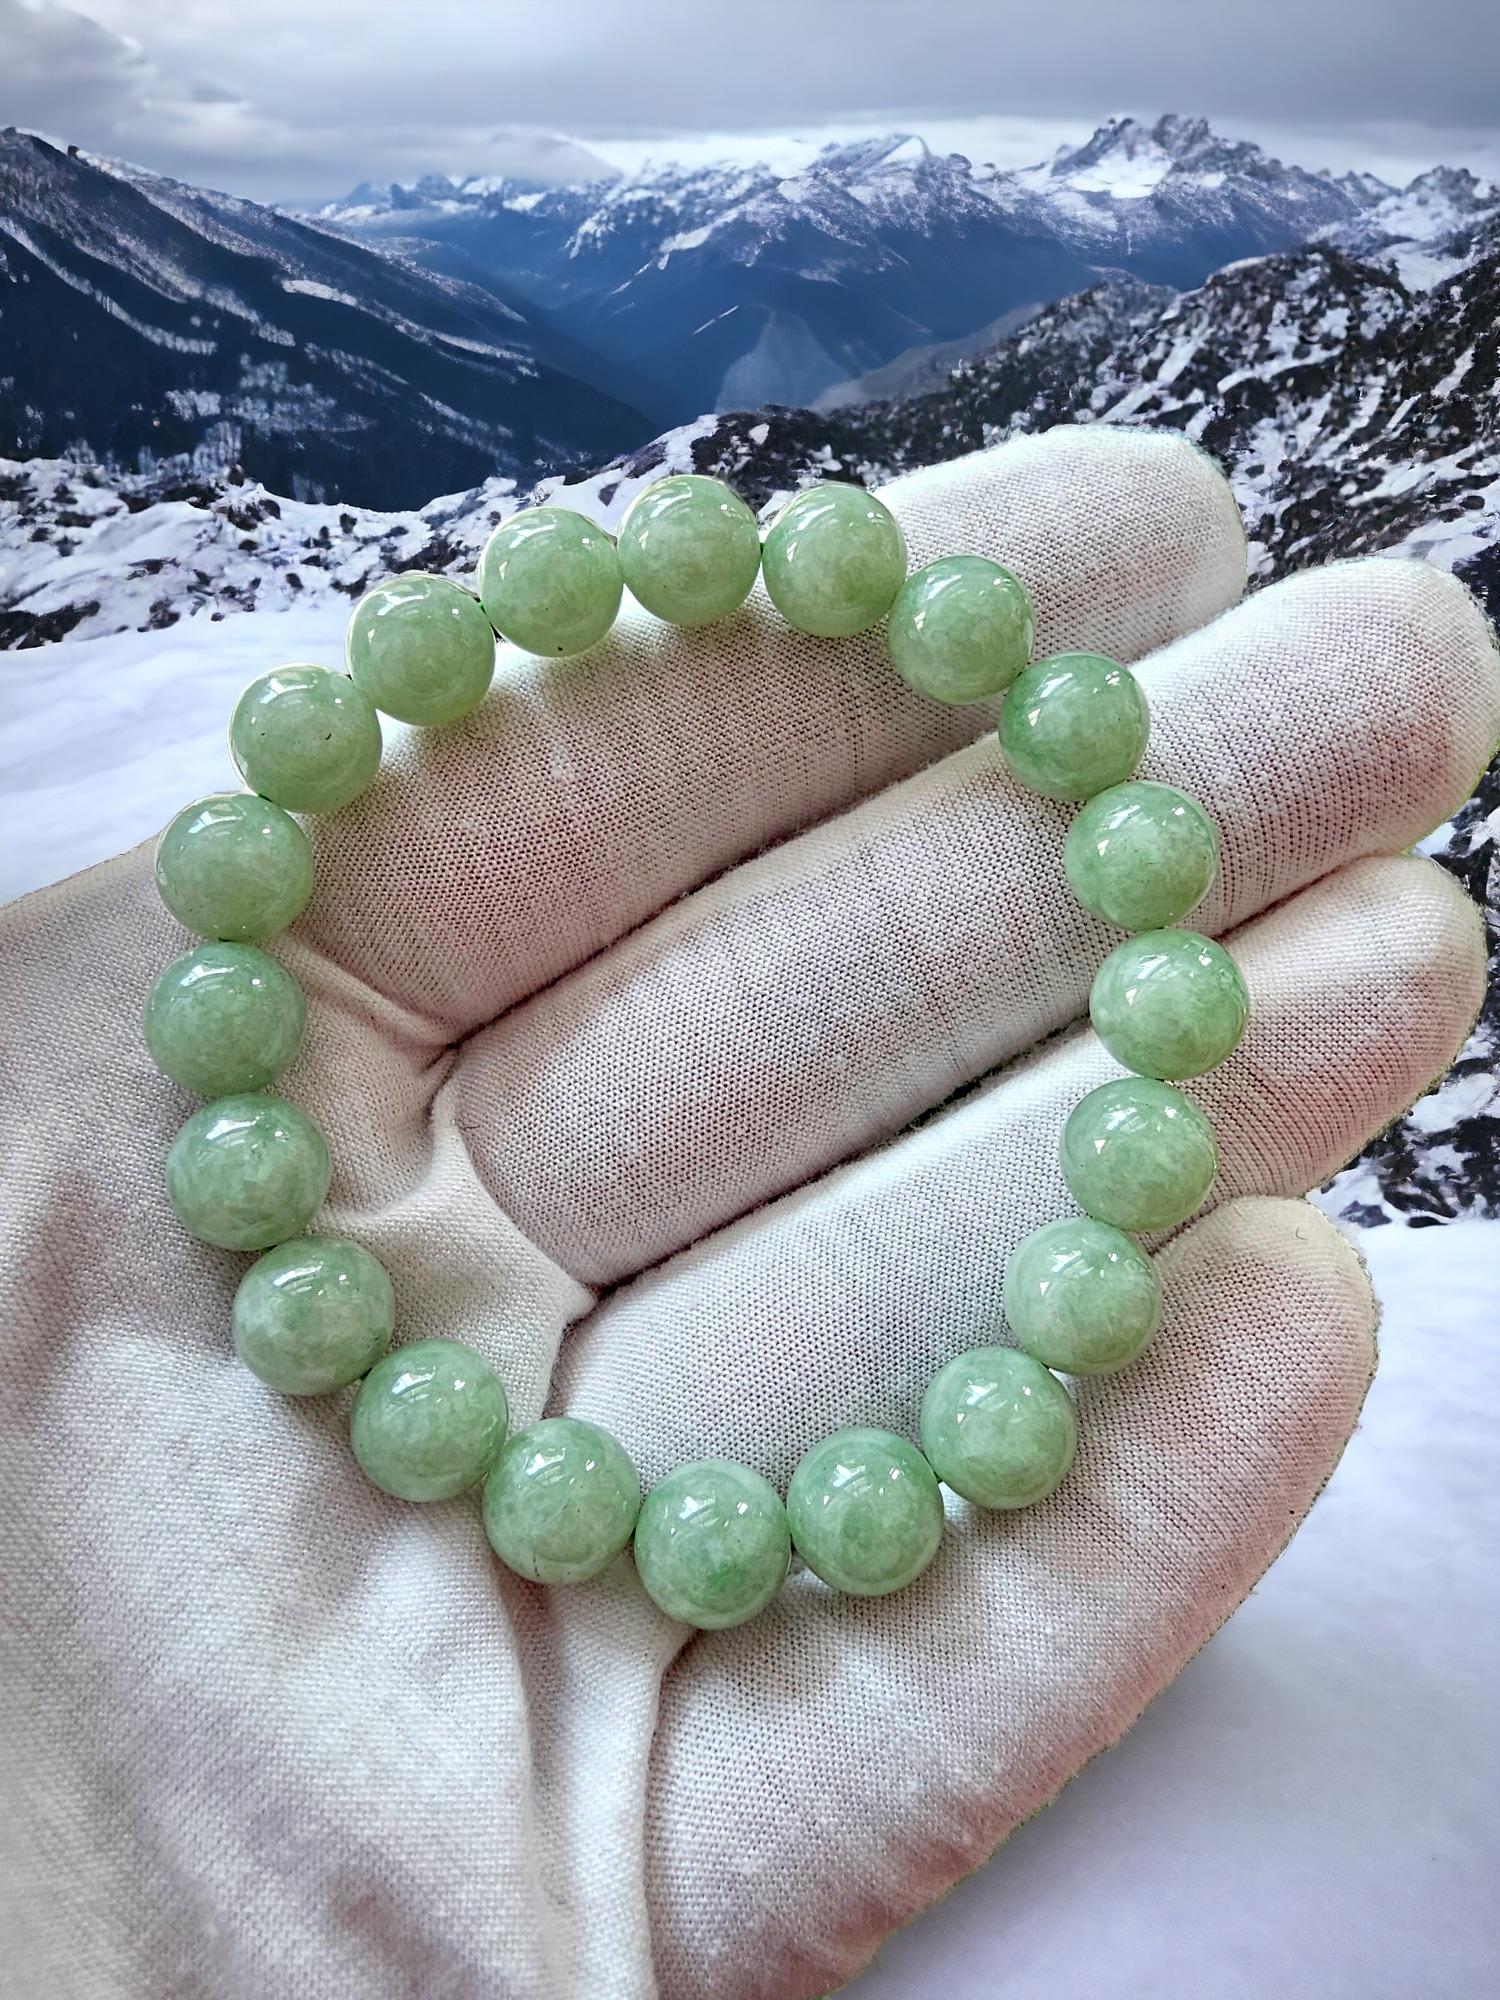 Imperial Green Burmese A-Jade Jadeite Beaded Bracelet (10mm Each x 20 beads) 05005

10mm each, 20 perfectly calibrated Green Jadeite Beads. Some of the rarest naturally occurring hues of A-Jadeite, calibrated Green creates a visually stunning